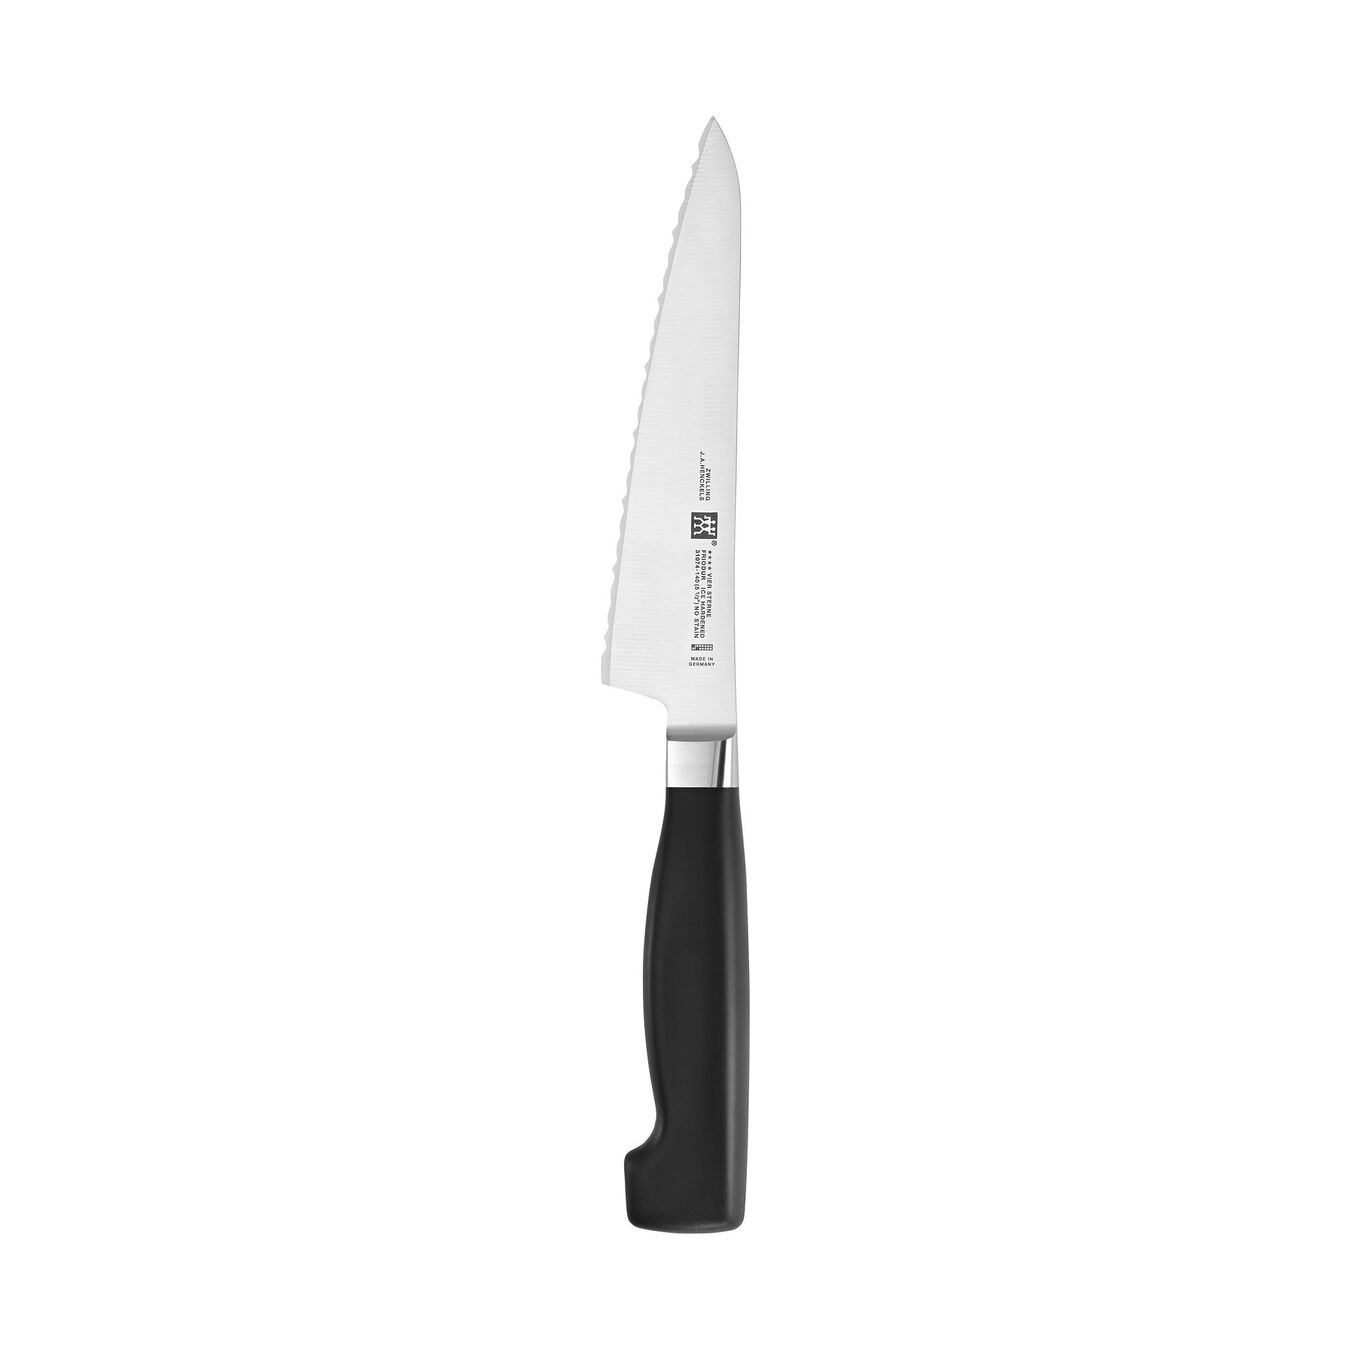 serrated kitchen knife with black handle on white background